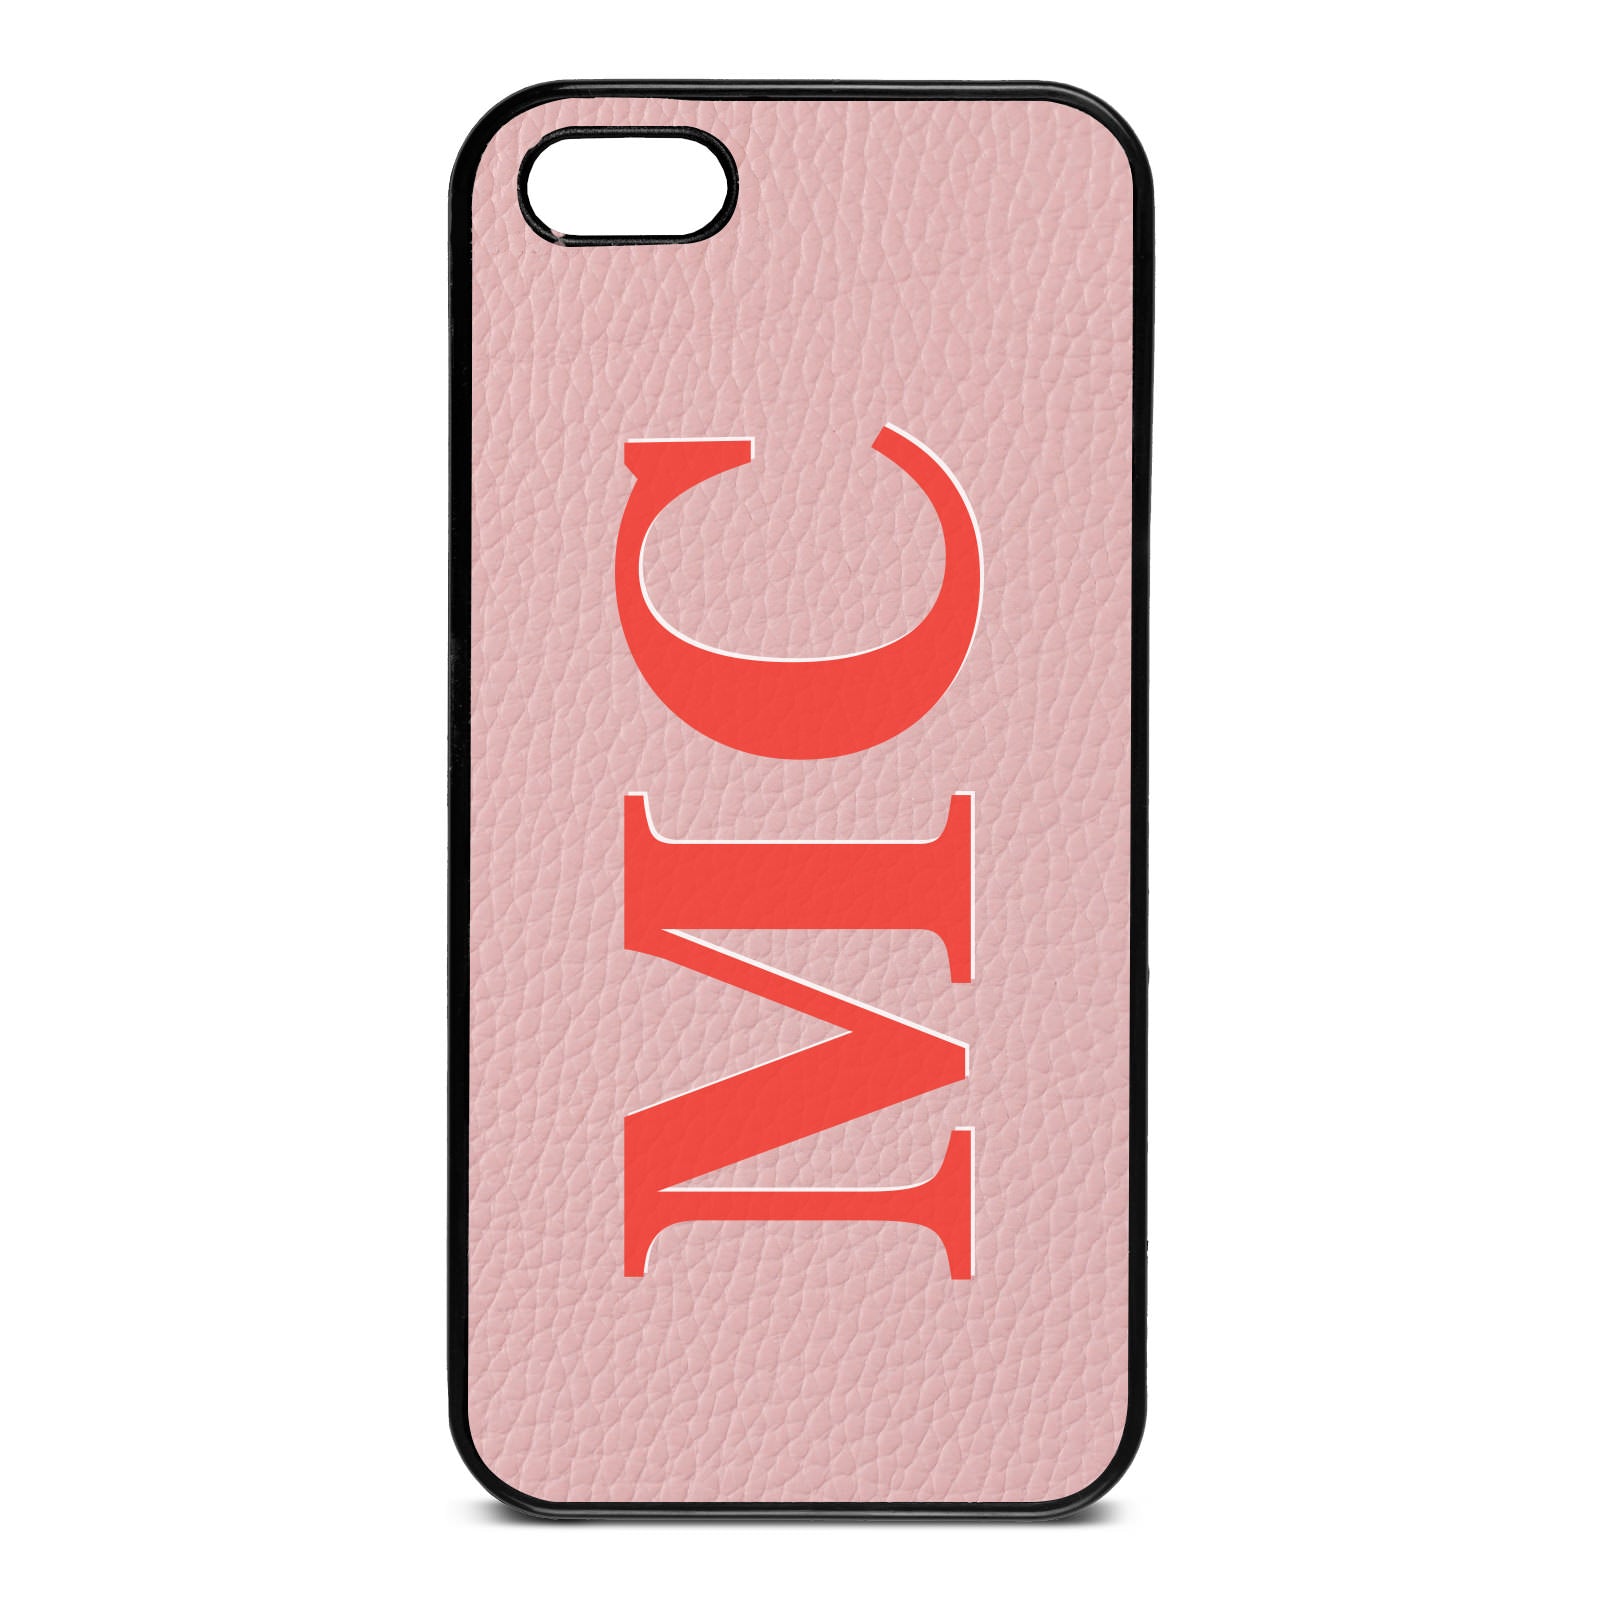 iPhone 5 Pink Pebble Leather Case